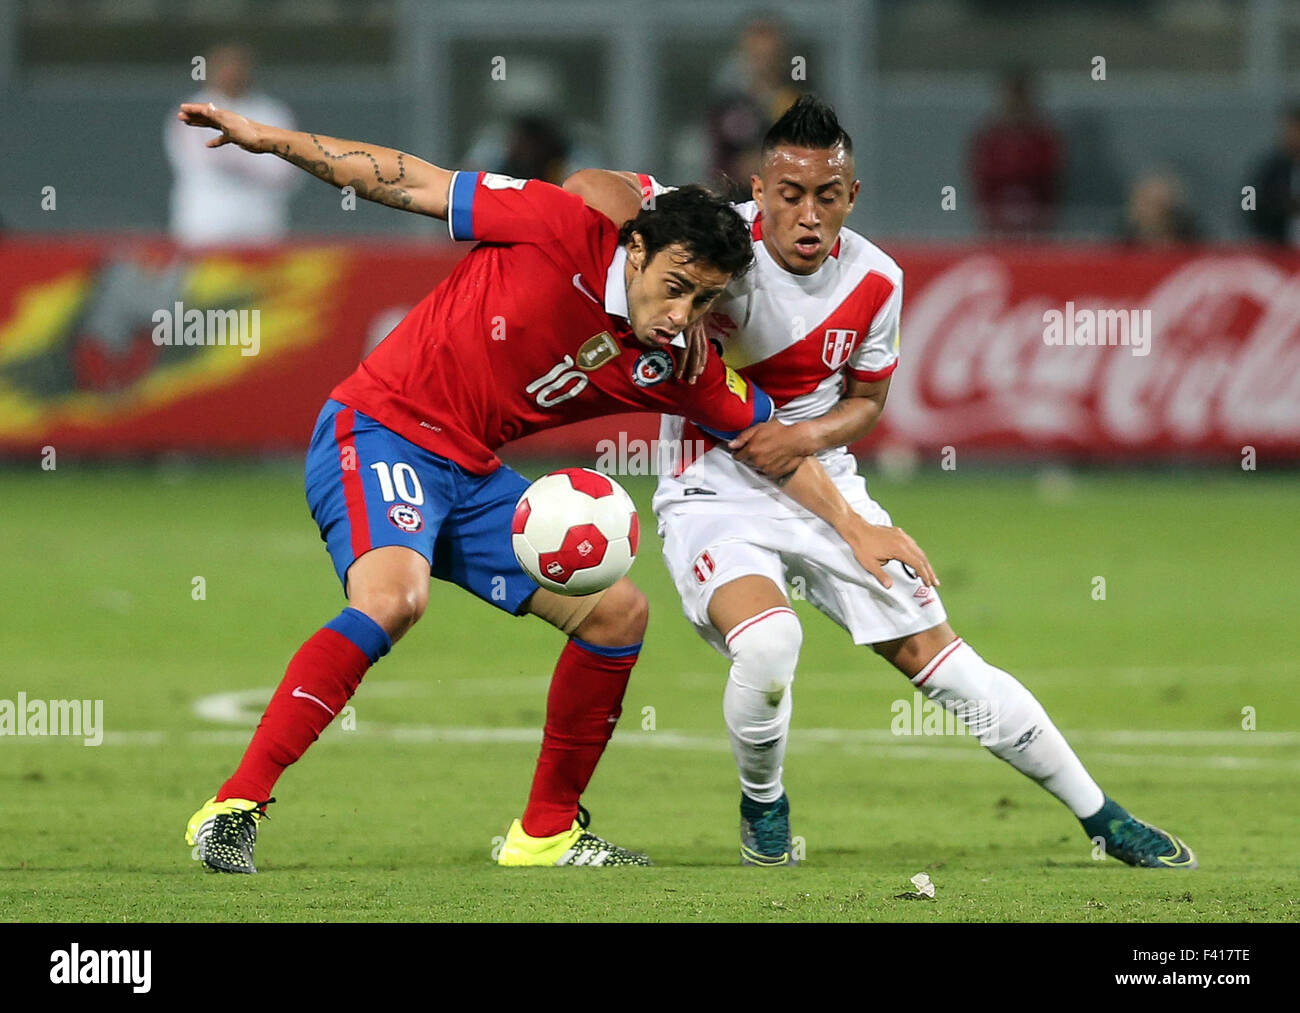 Lima. 13th Oct, 2015. Jorge Valdivia(L) of Chile vies with Christian Cueva of Peru during their Round 1 Group 1 match of 2018 World Cup South American Qualifiers at the National Stadium in Lima, Peru on Oct. 13, 2015. Chile won 4-3. Credit:  ANFP/Xinhua/Alamy Live News Stock Photo